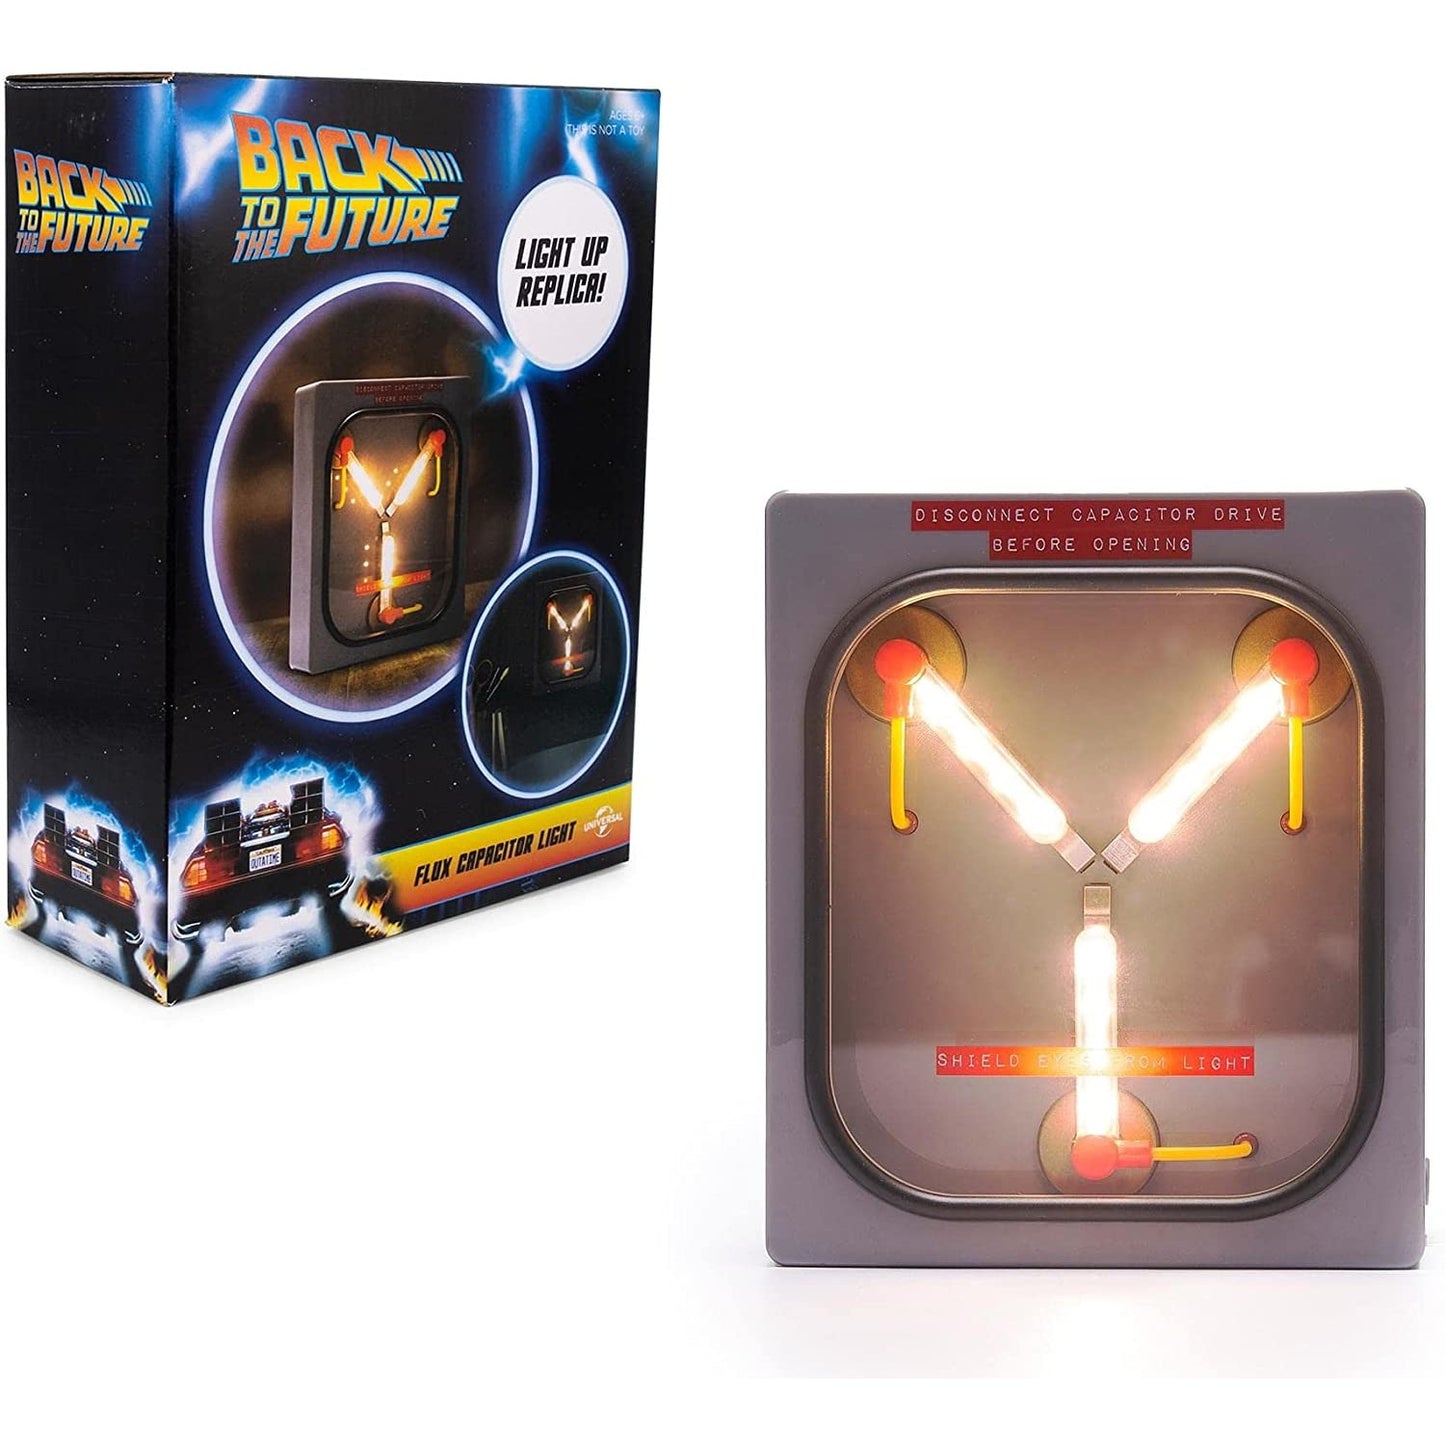 A Back to the Future Flux Capacitor replica mood light with its packaging box.